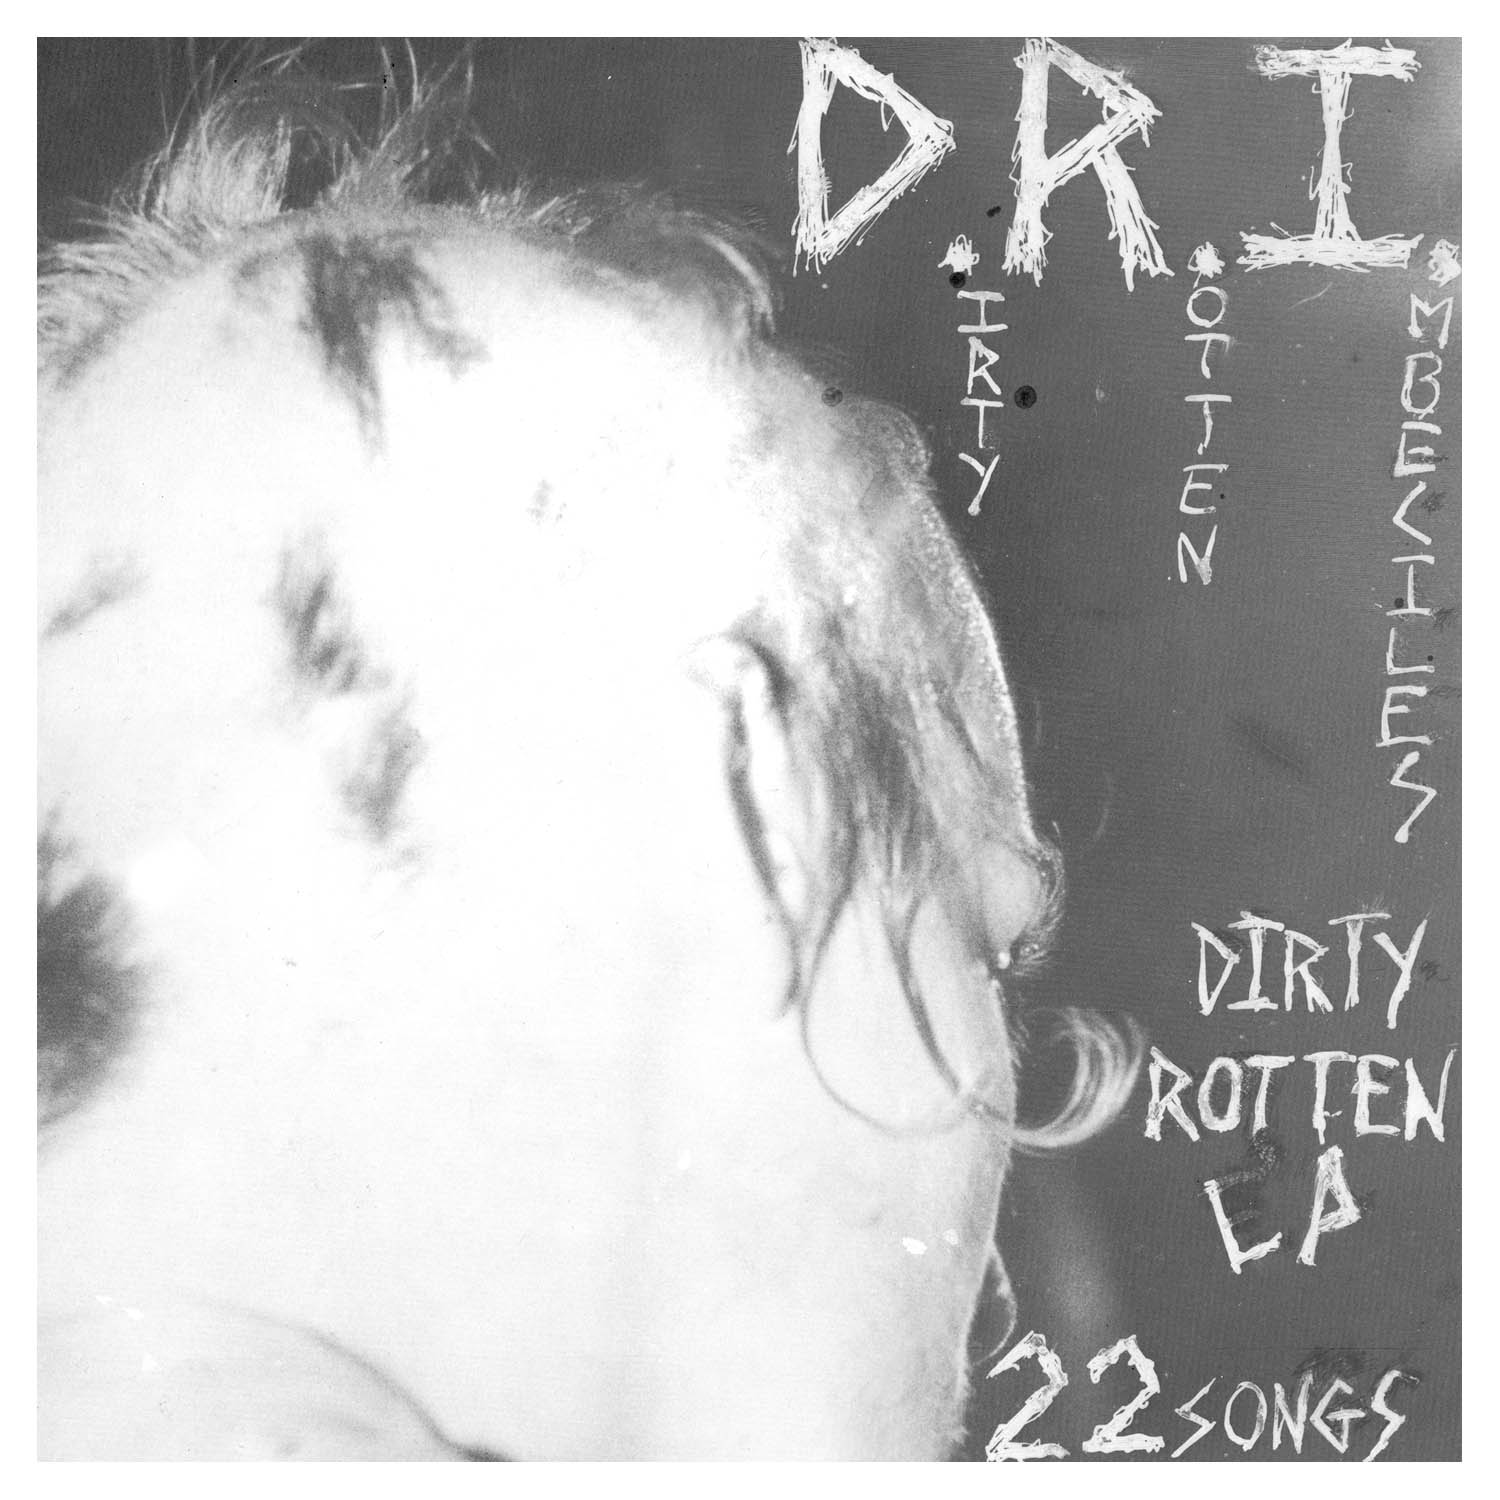 D.R.I. – “Dirty Rotten LP” LP | Beer City Records & Skateboards